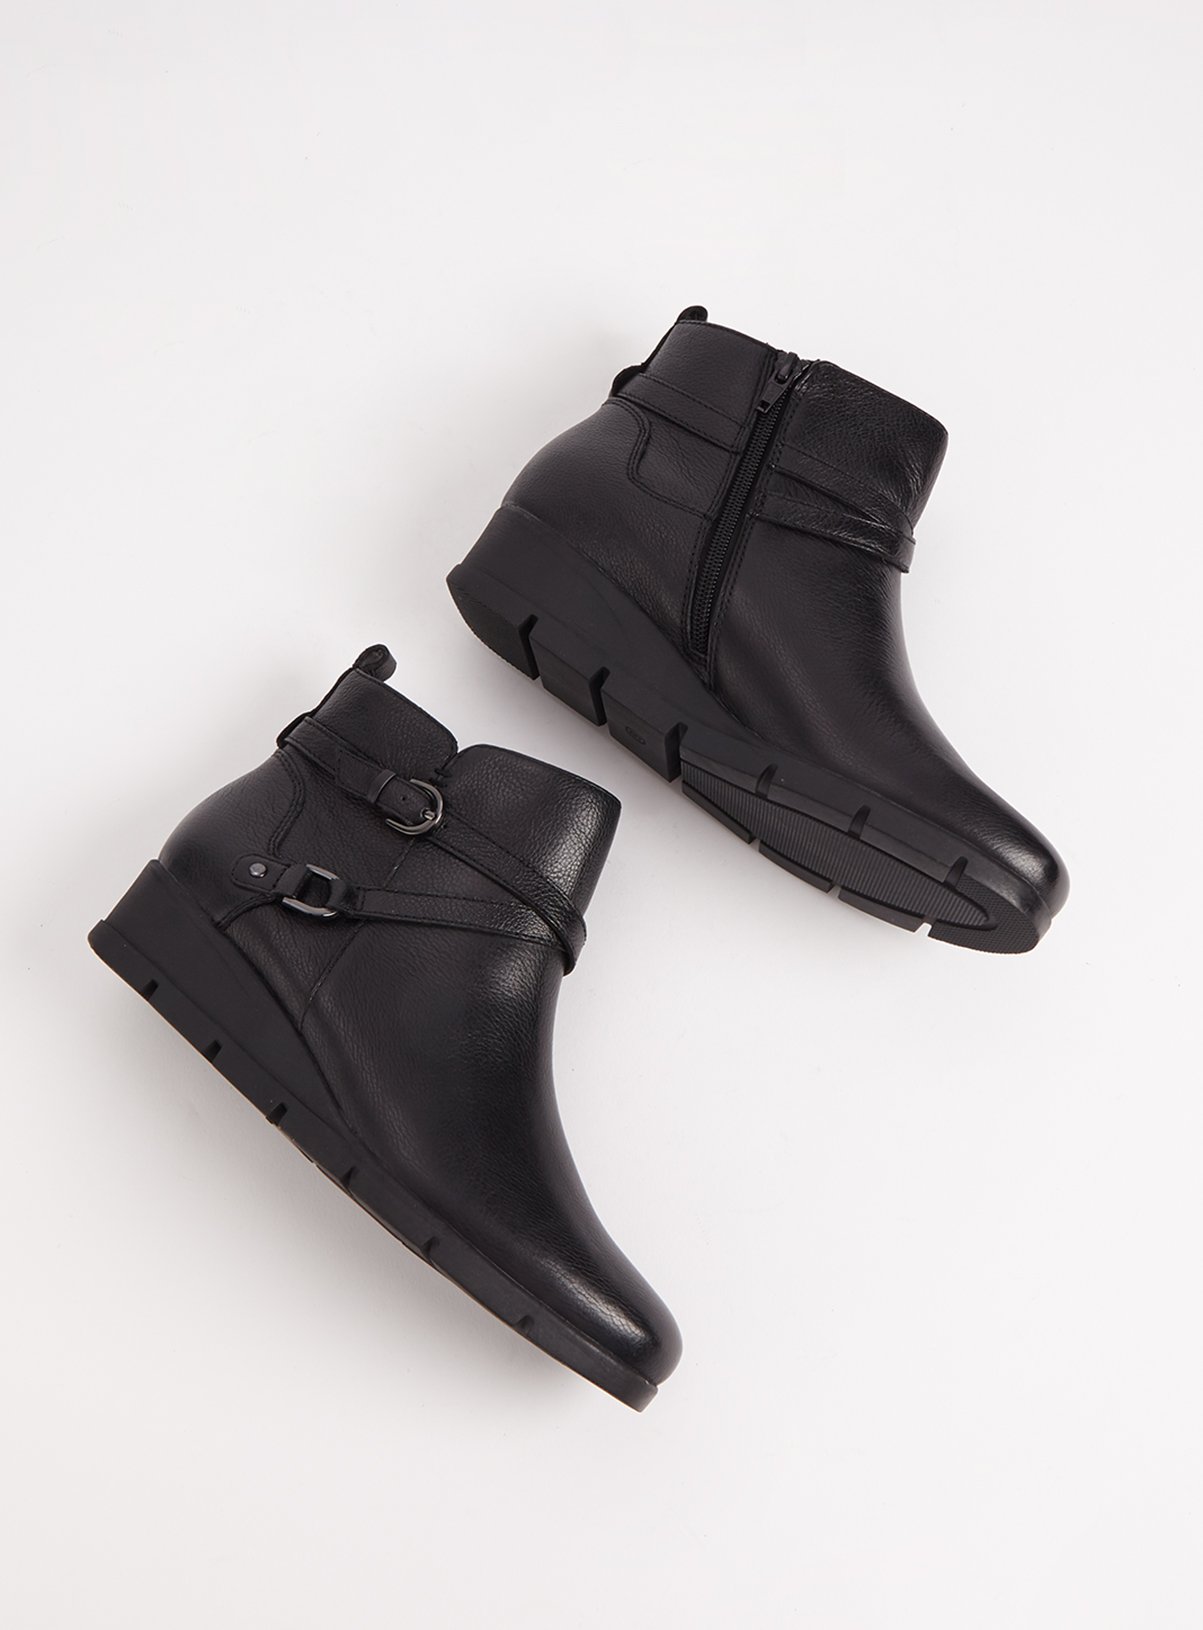 comfortable black leather boots